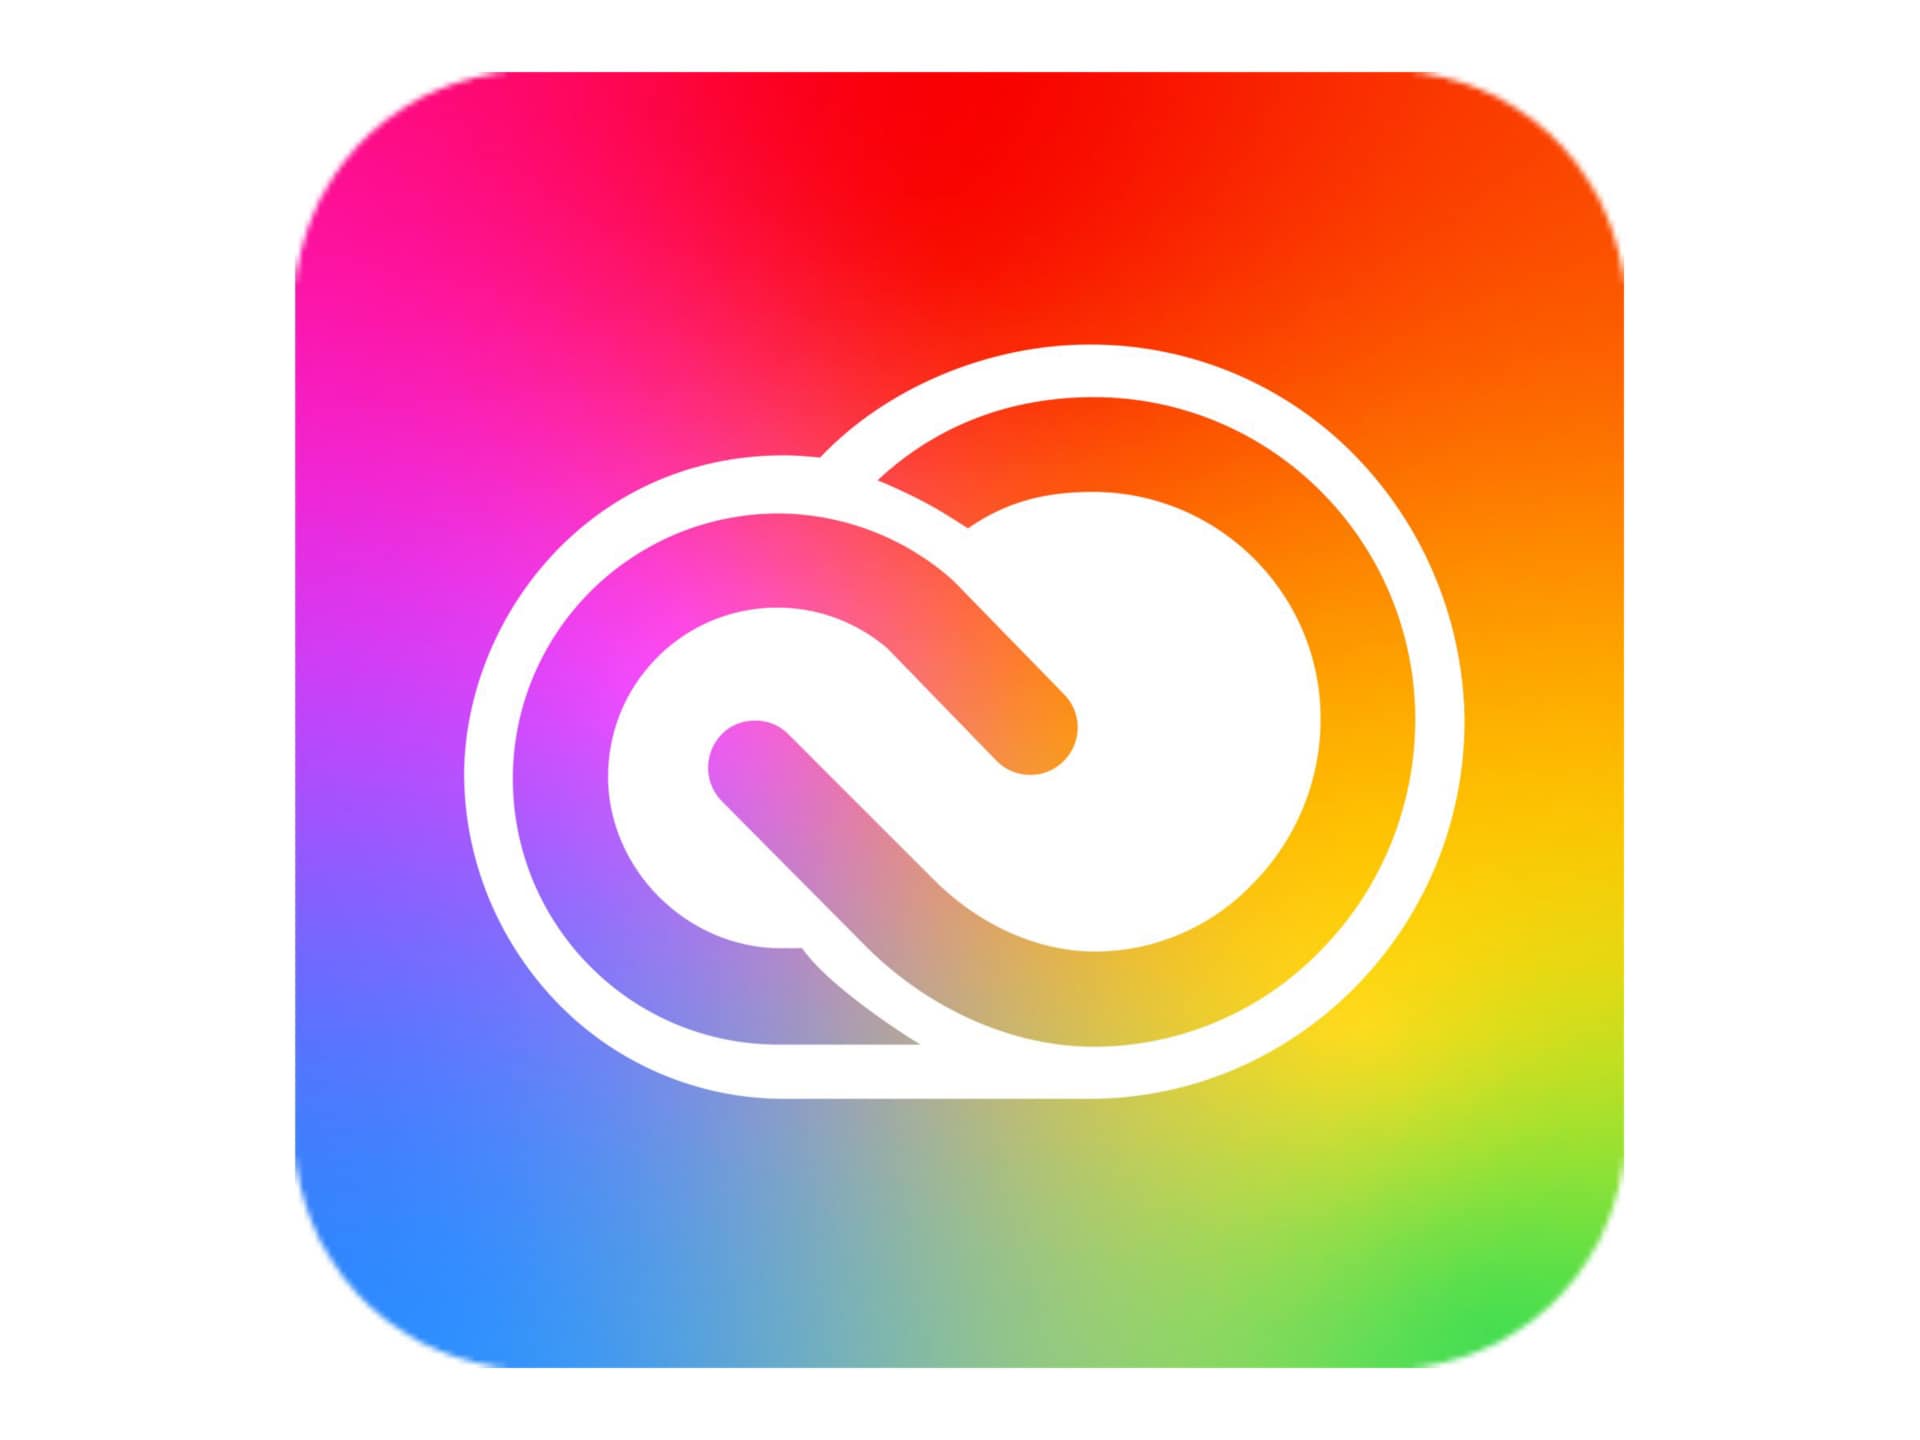 Adobe Creative Cloud for Enterprise - All Apps - Subscription New (35 months) - 1 device